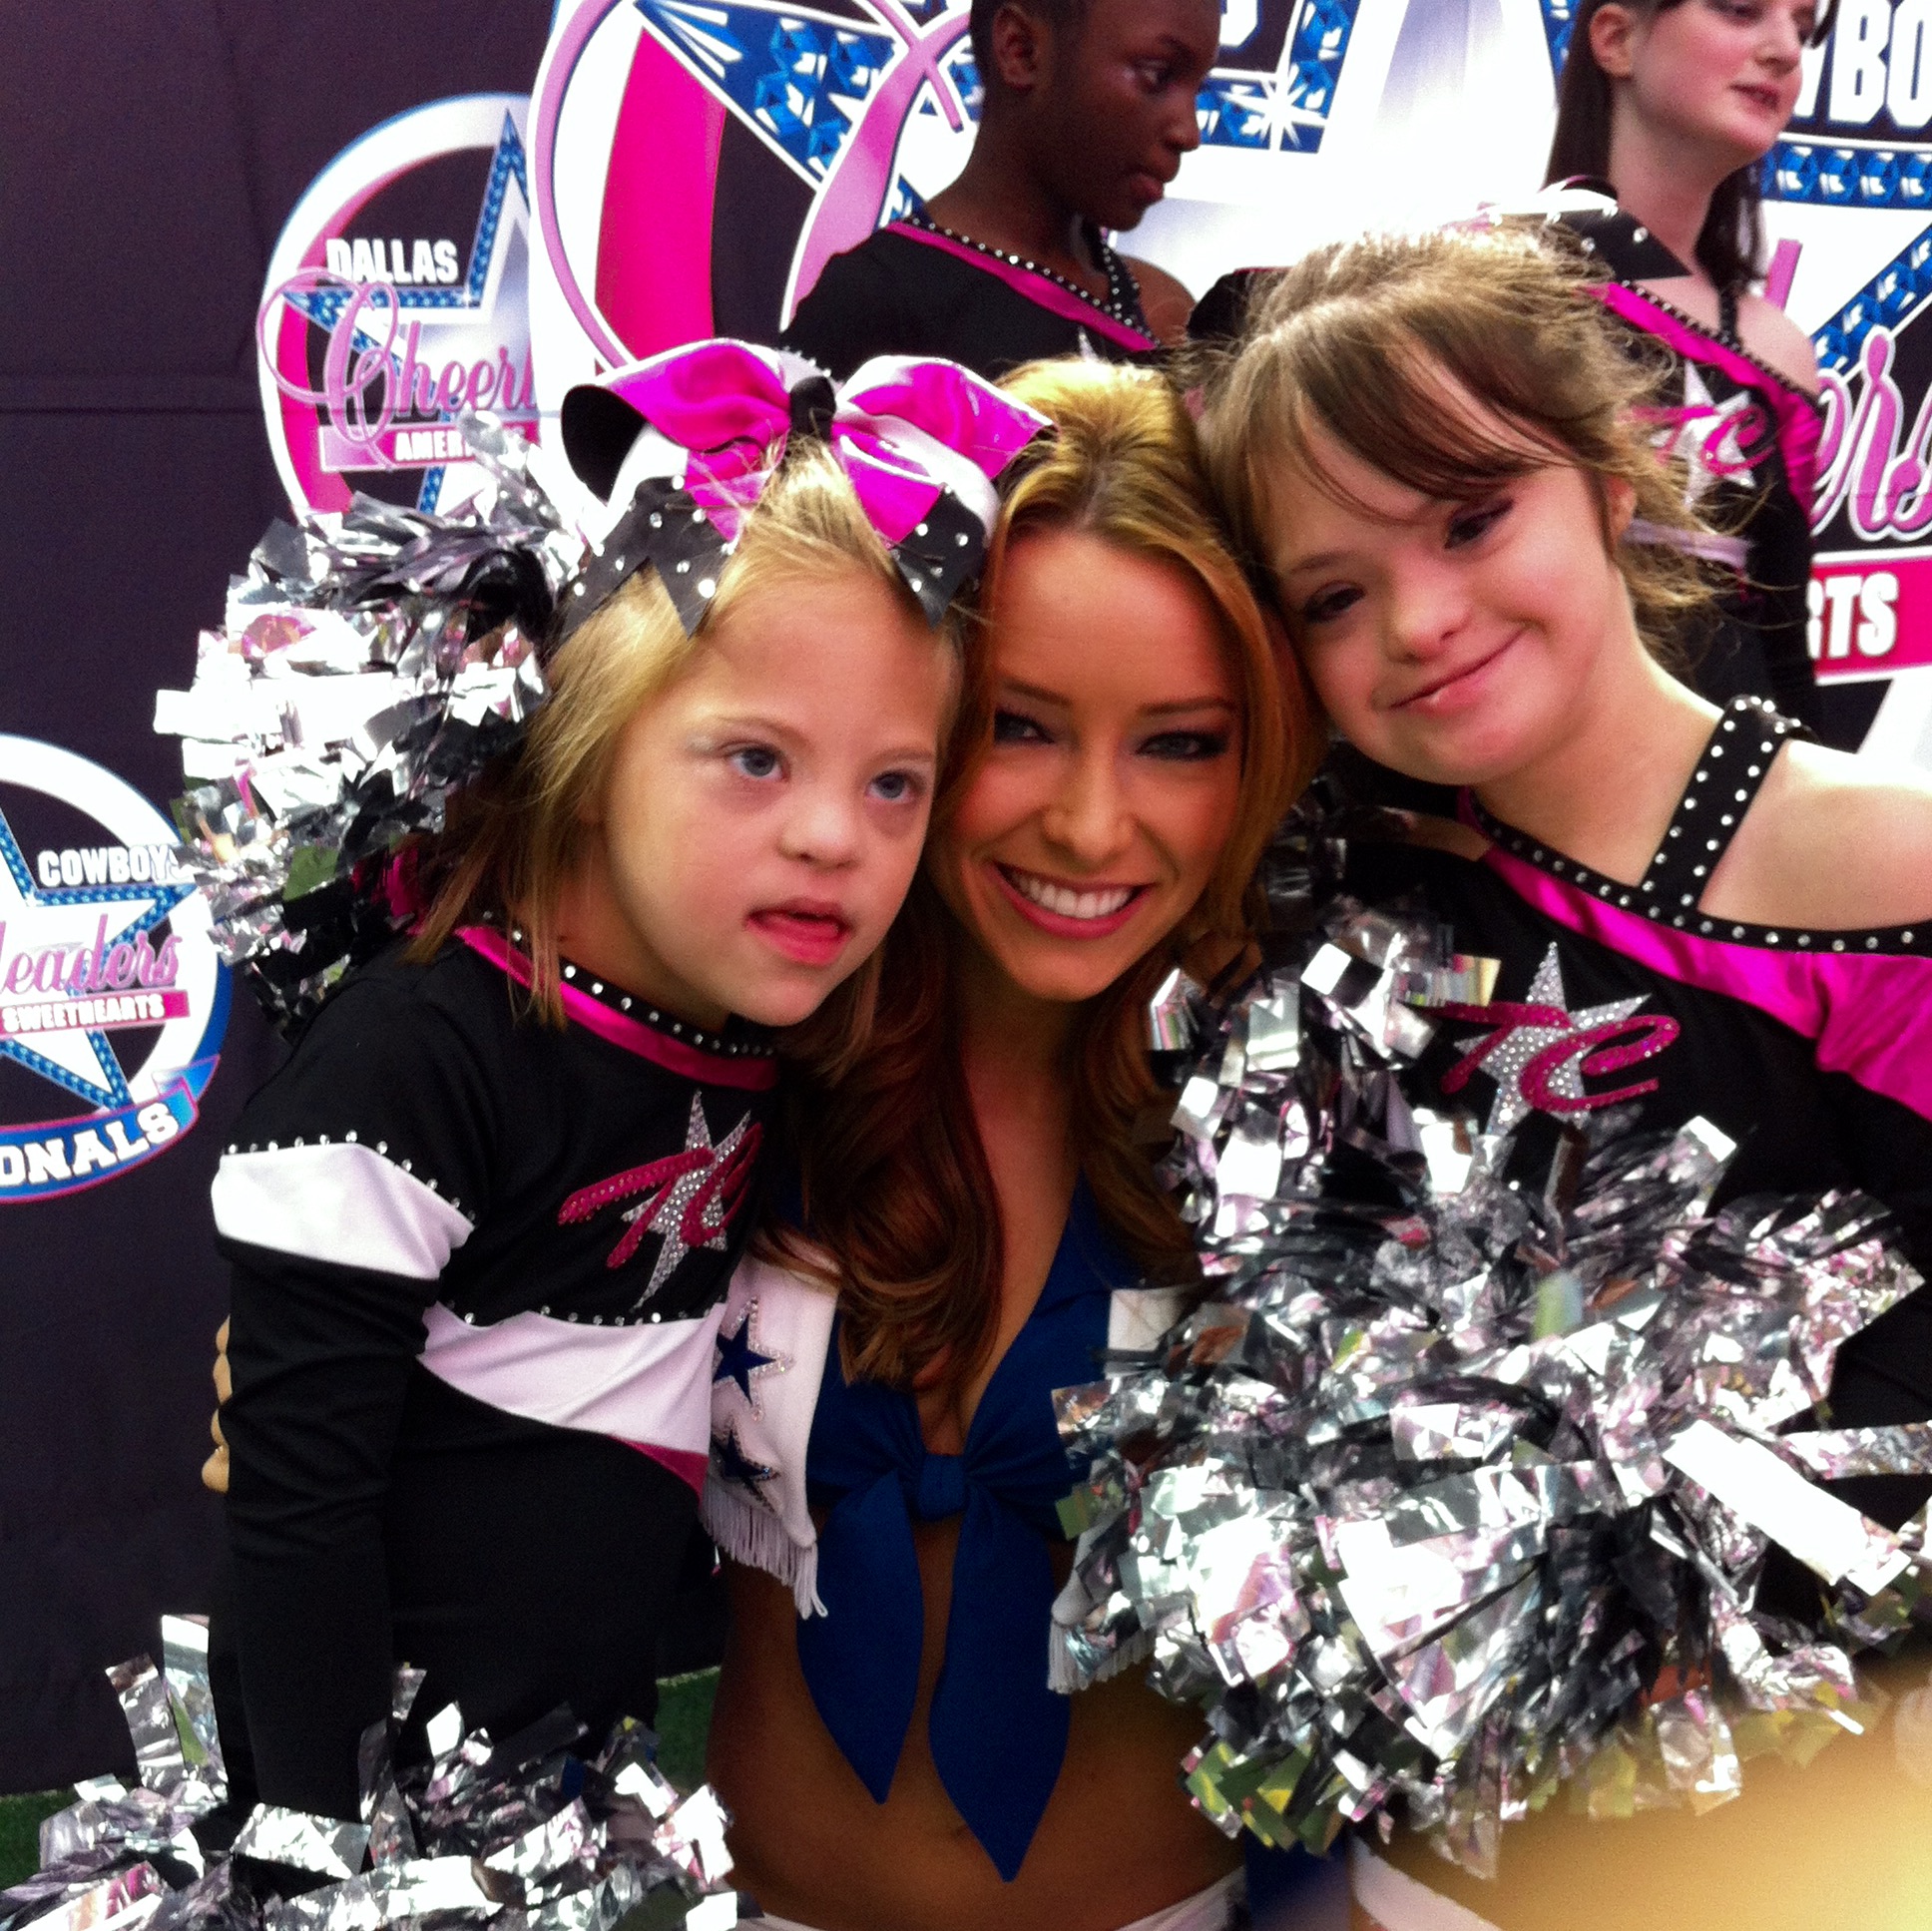 PHOTO: Katie Longwroth, right, pictured here with her friend Casey and a Dallas Cowboy cheerleader. 